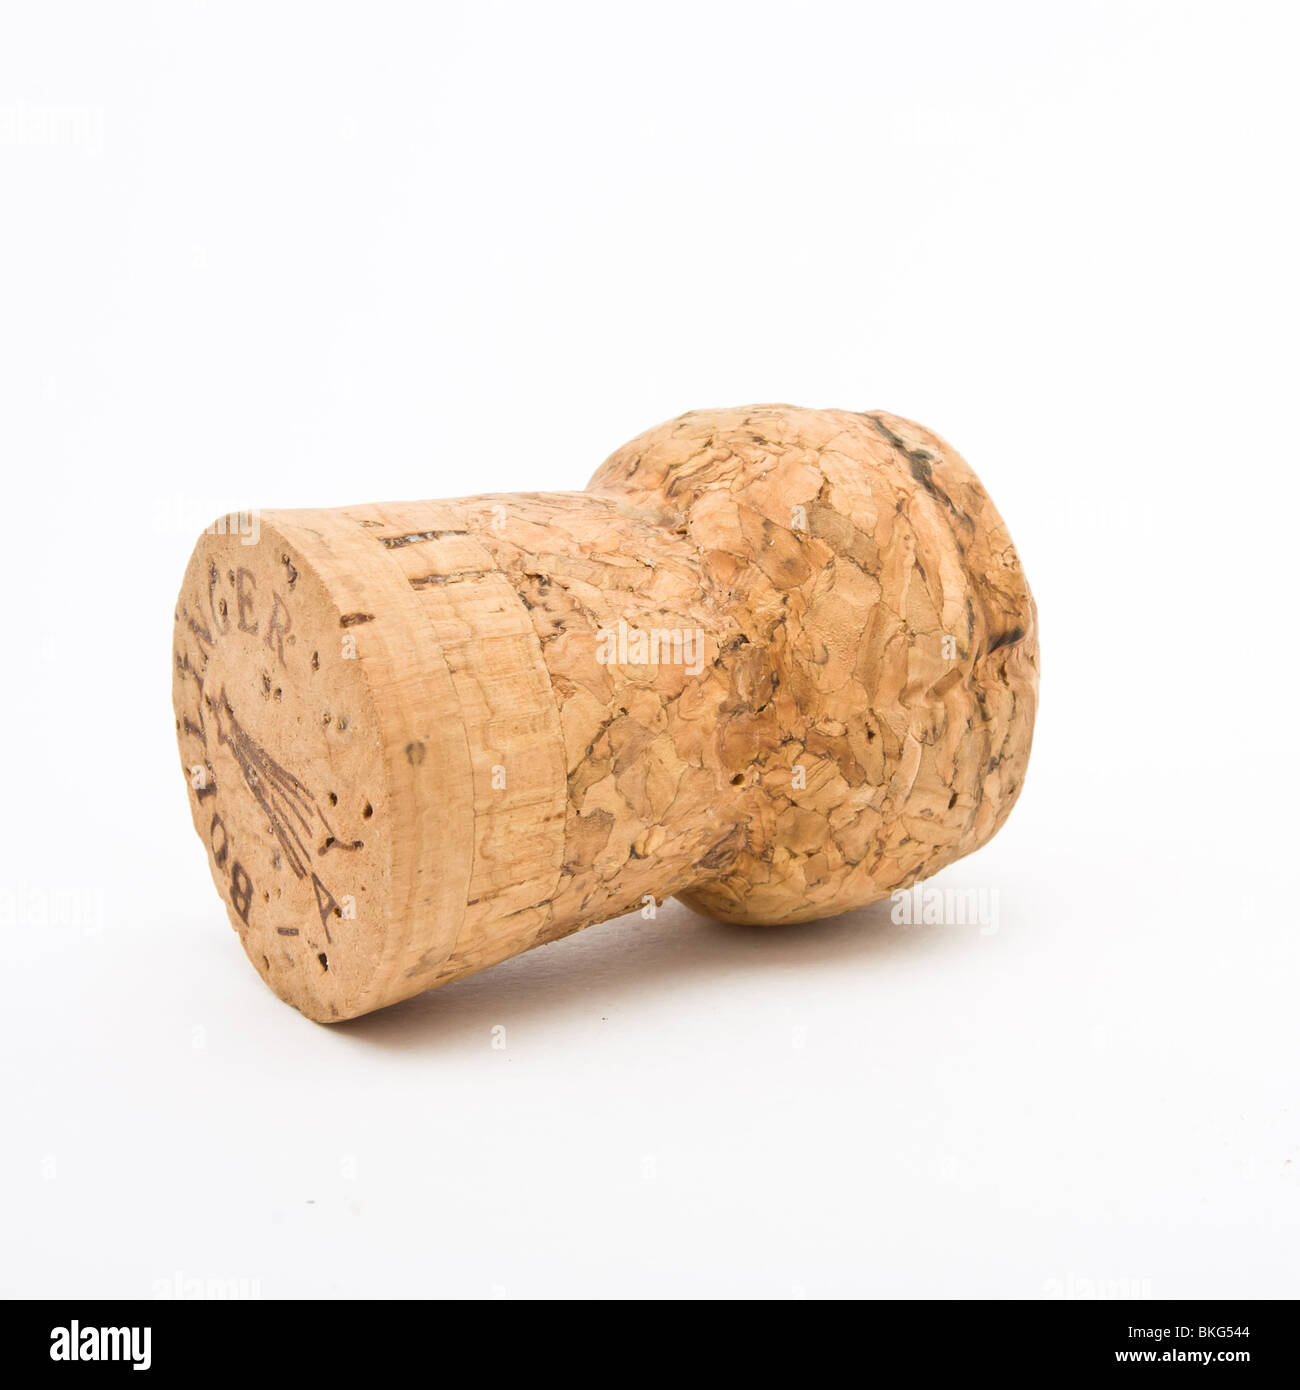 Champagne Cork from expensive bottle of Bollinger vintage French champagne isolated against white background. Stock Photo